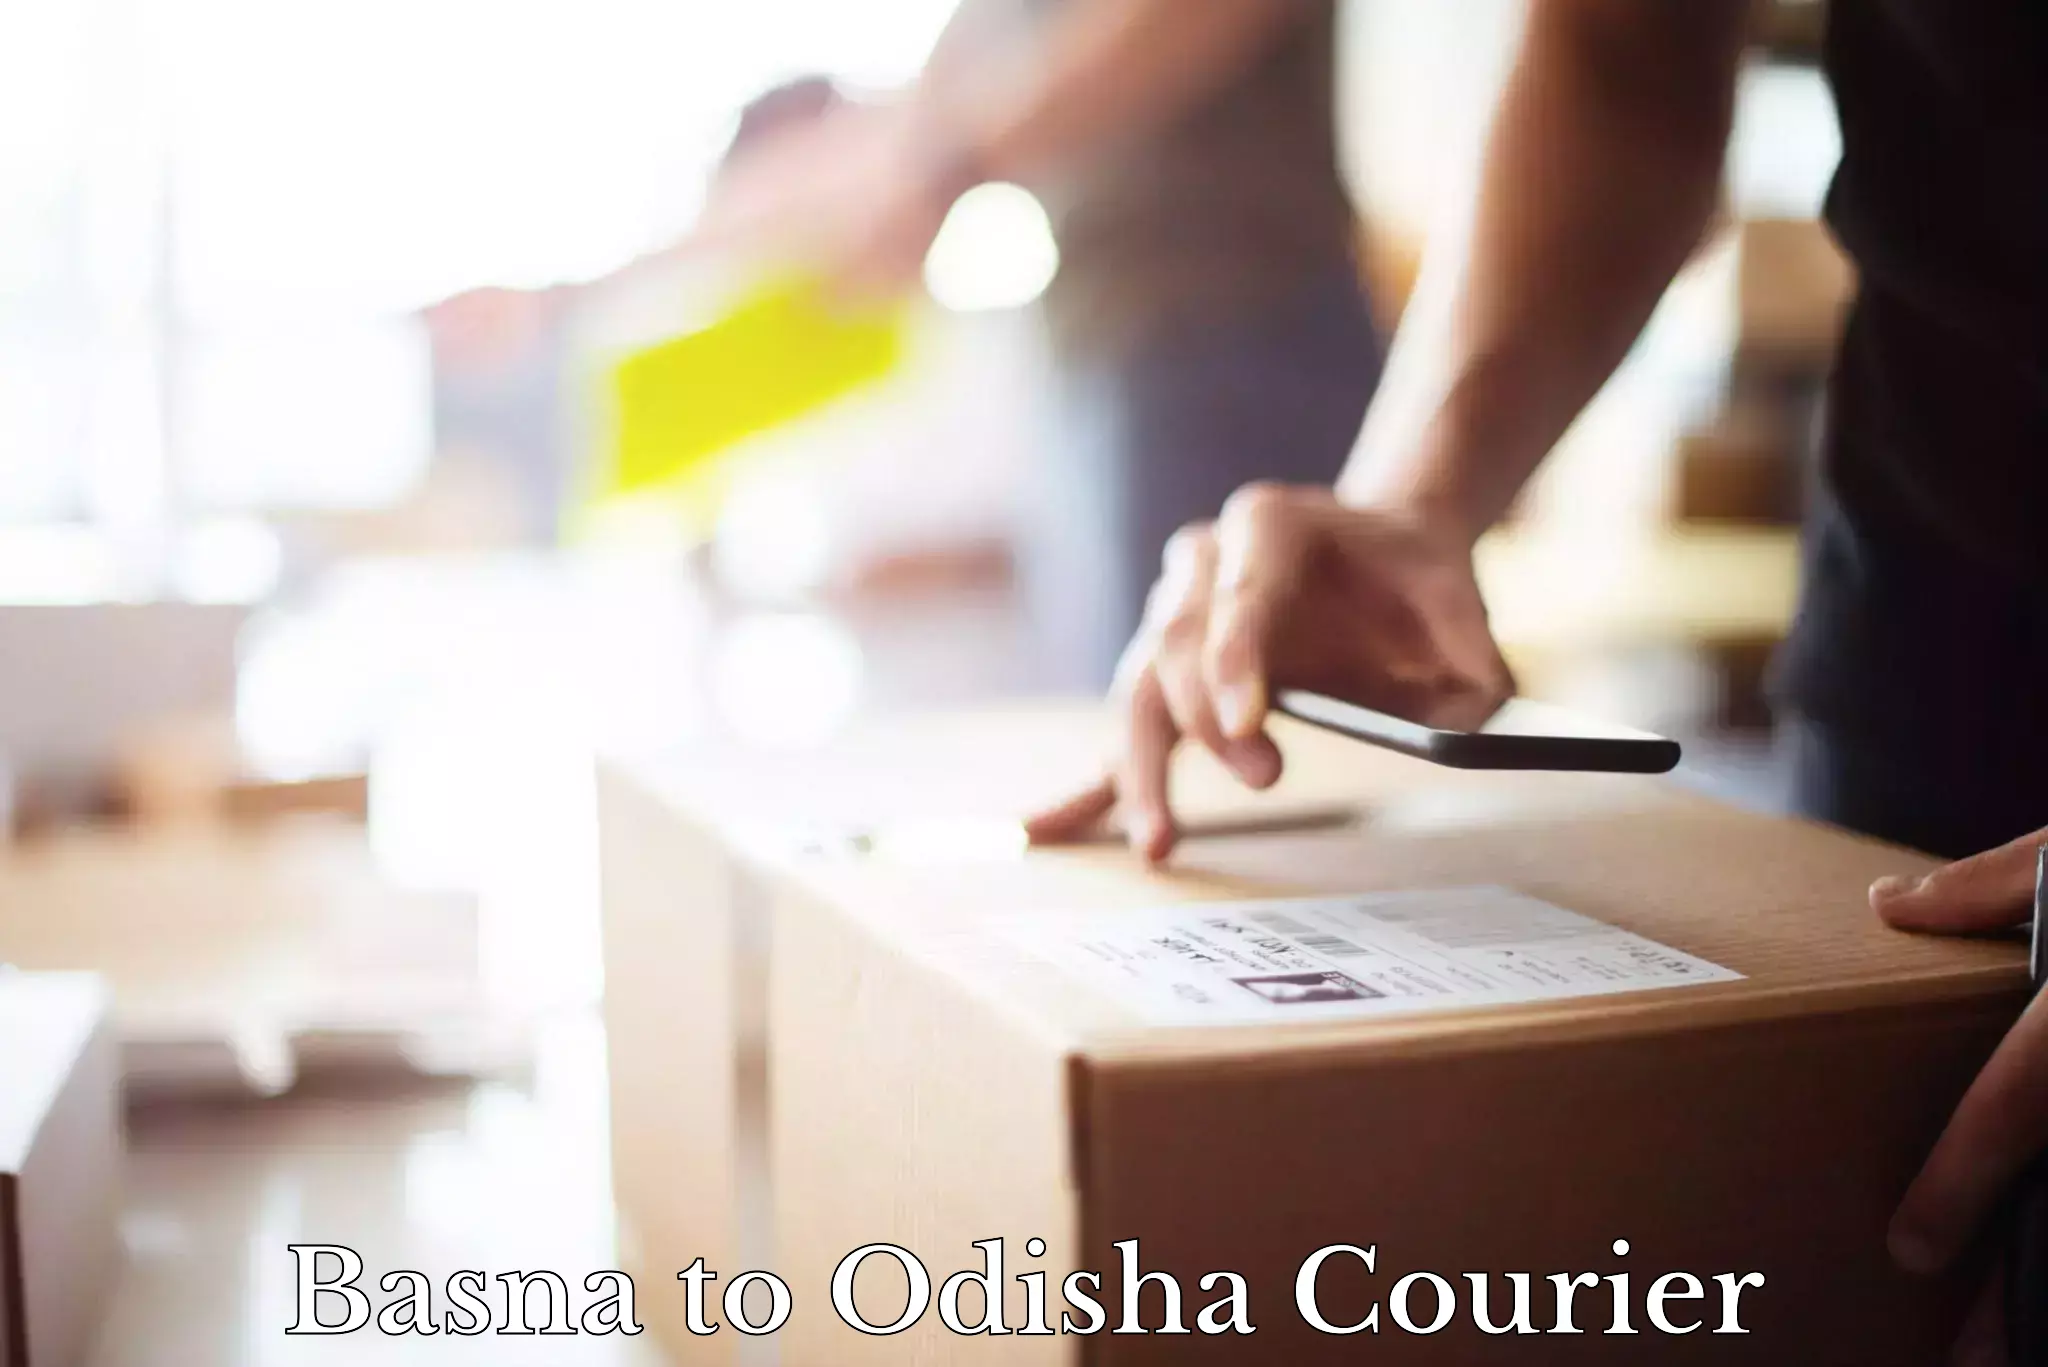 On-demand shipping options Basna to Chandipur